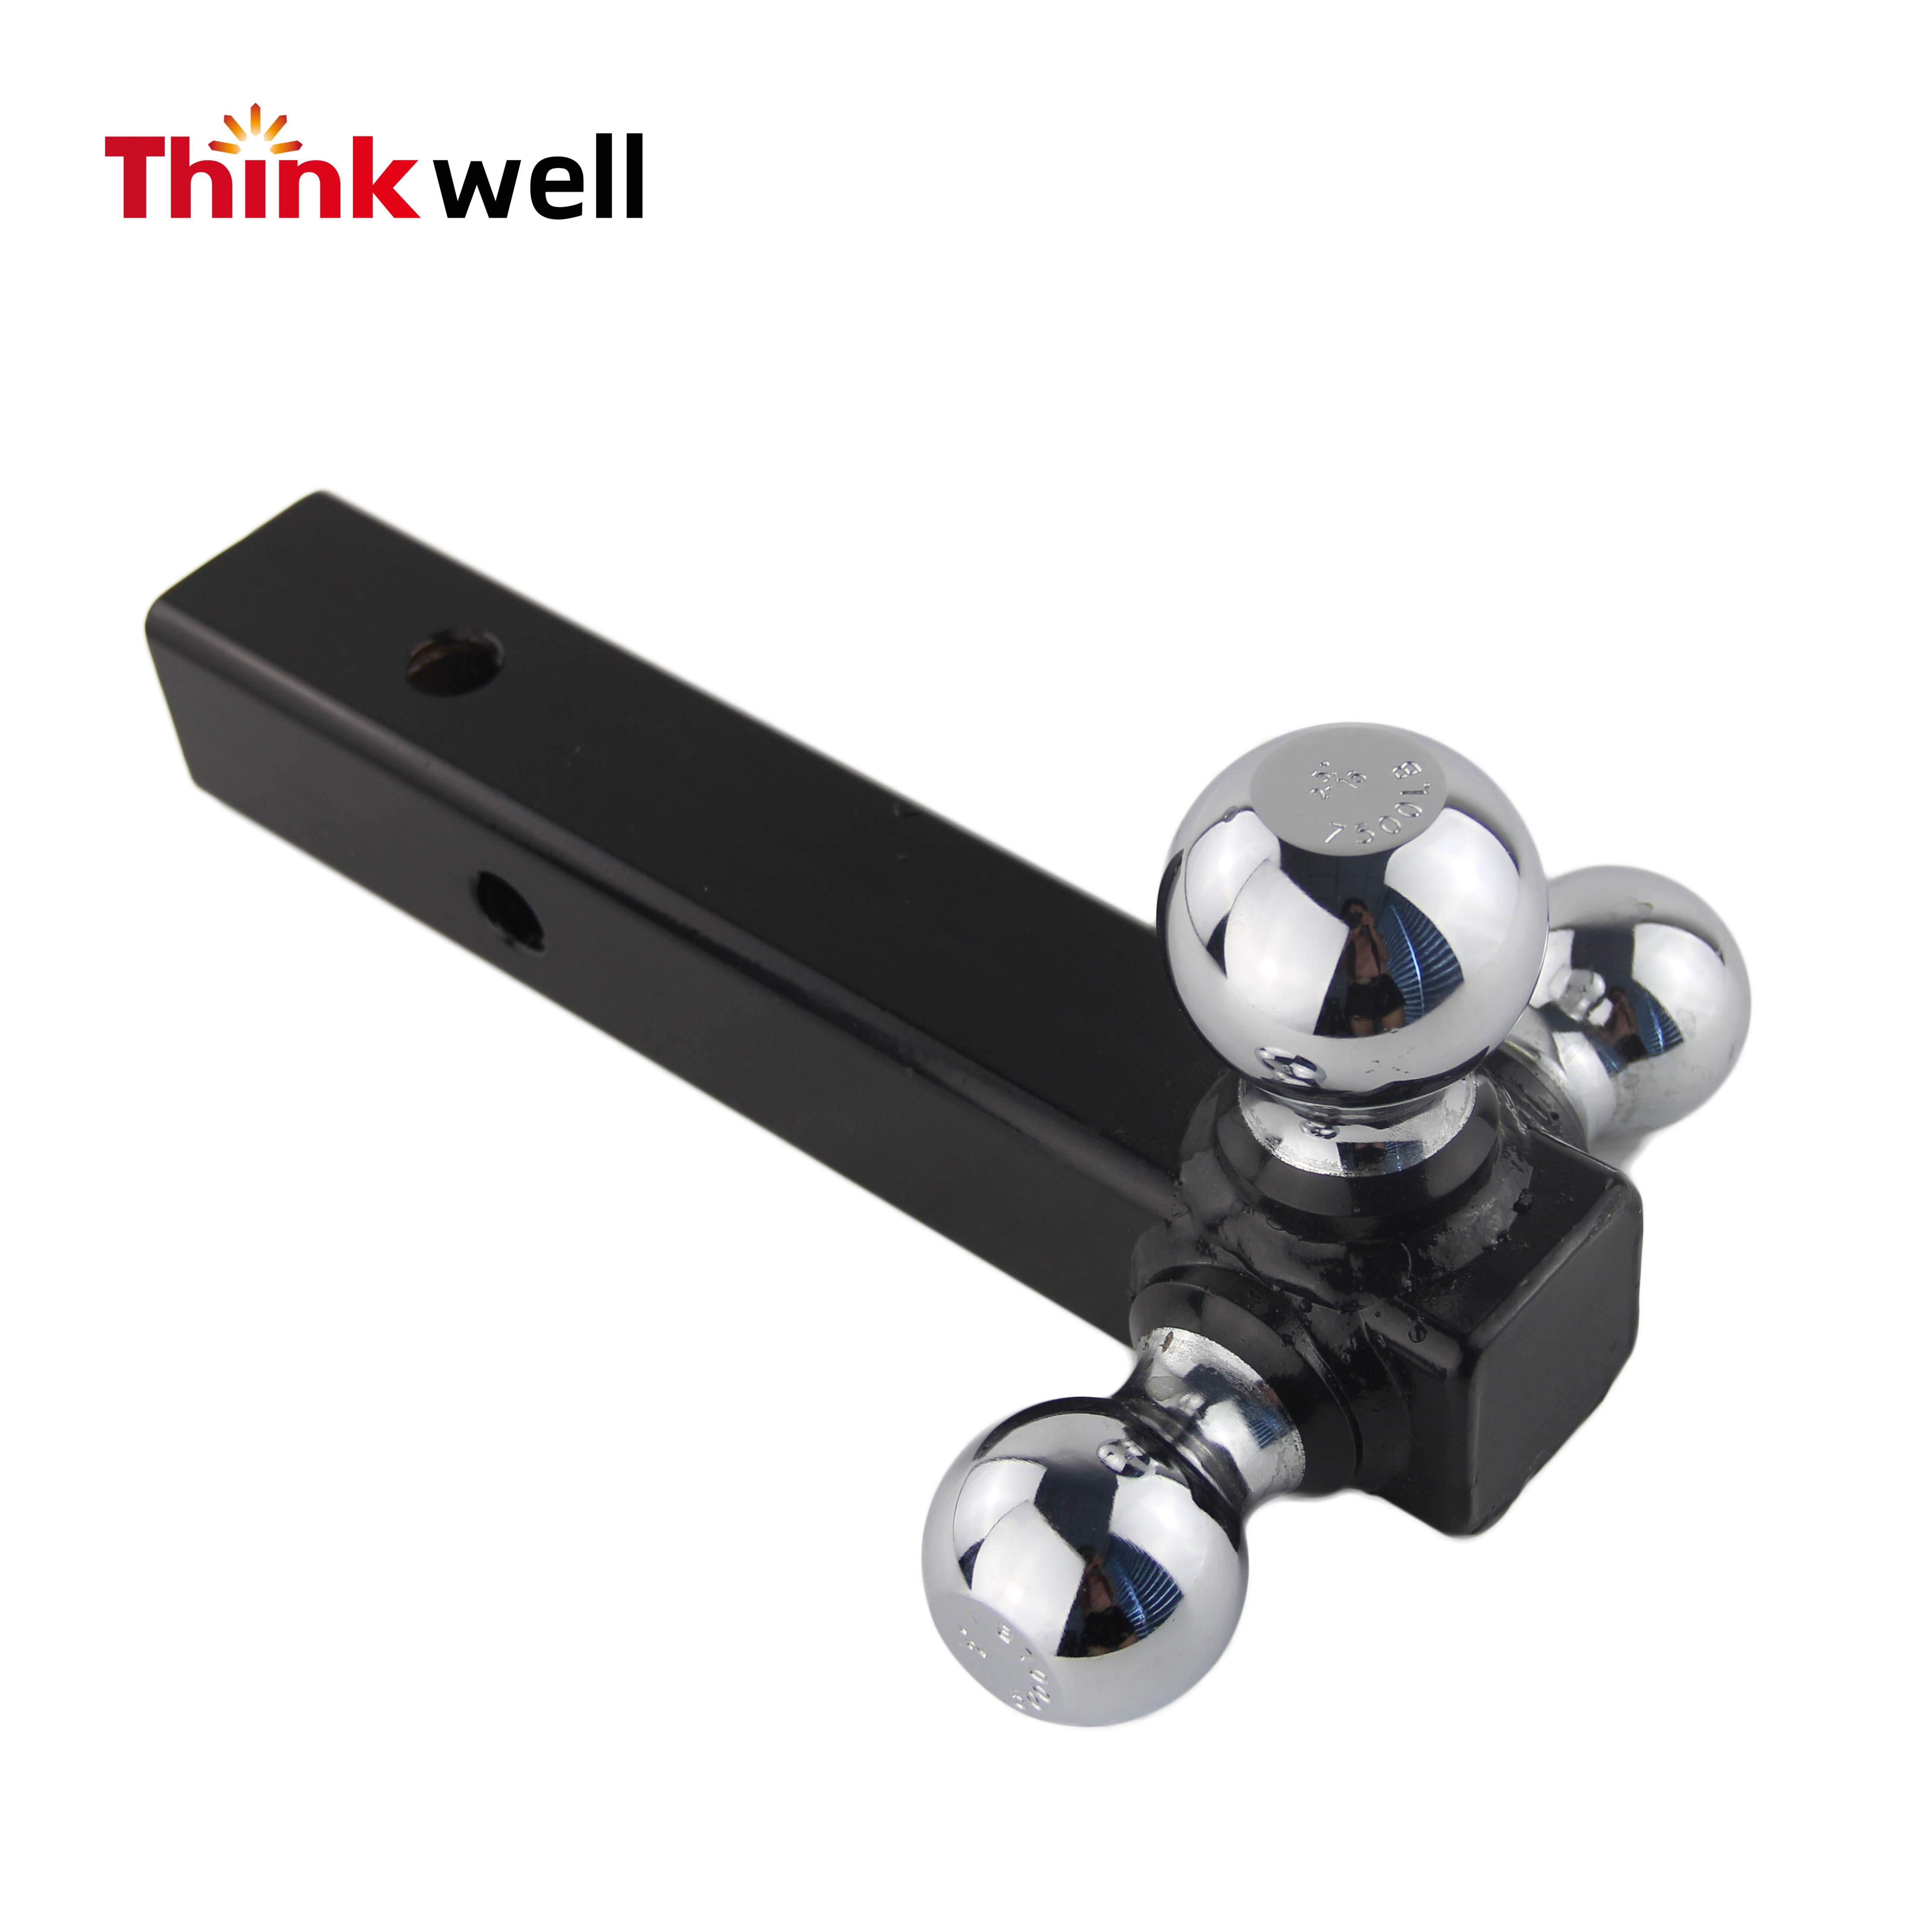 Trailer Hitch Tri-Ball Mount With Hook